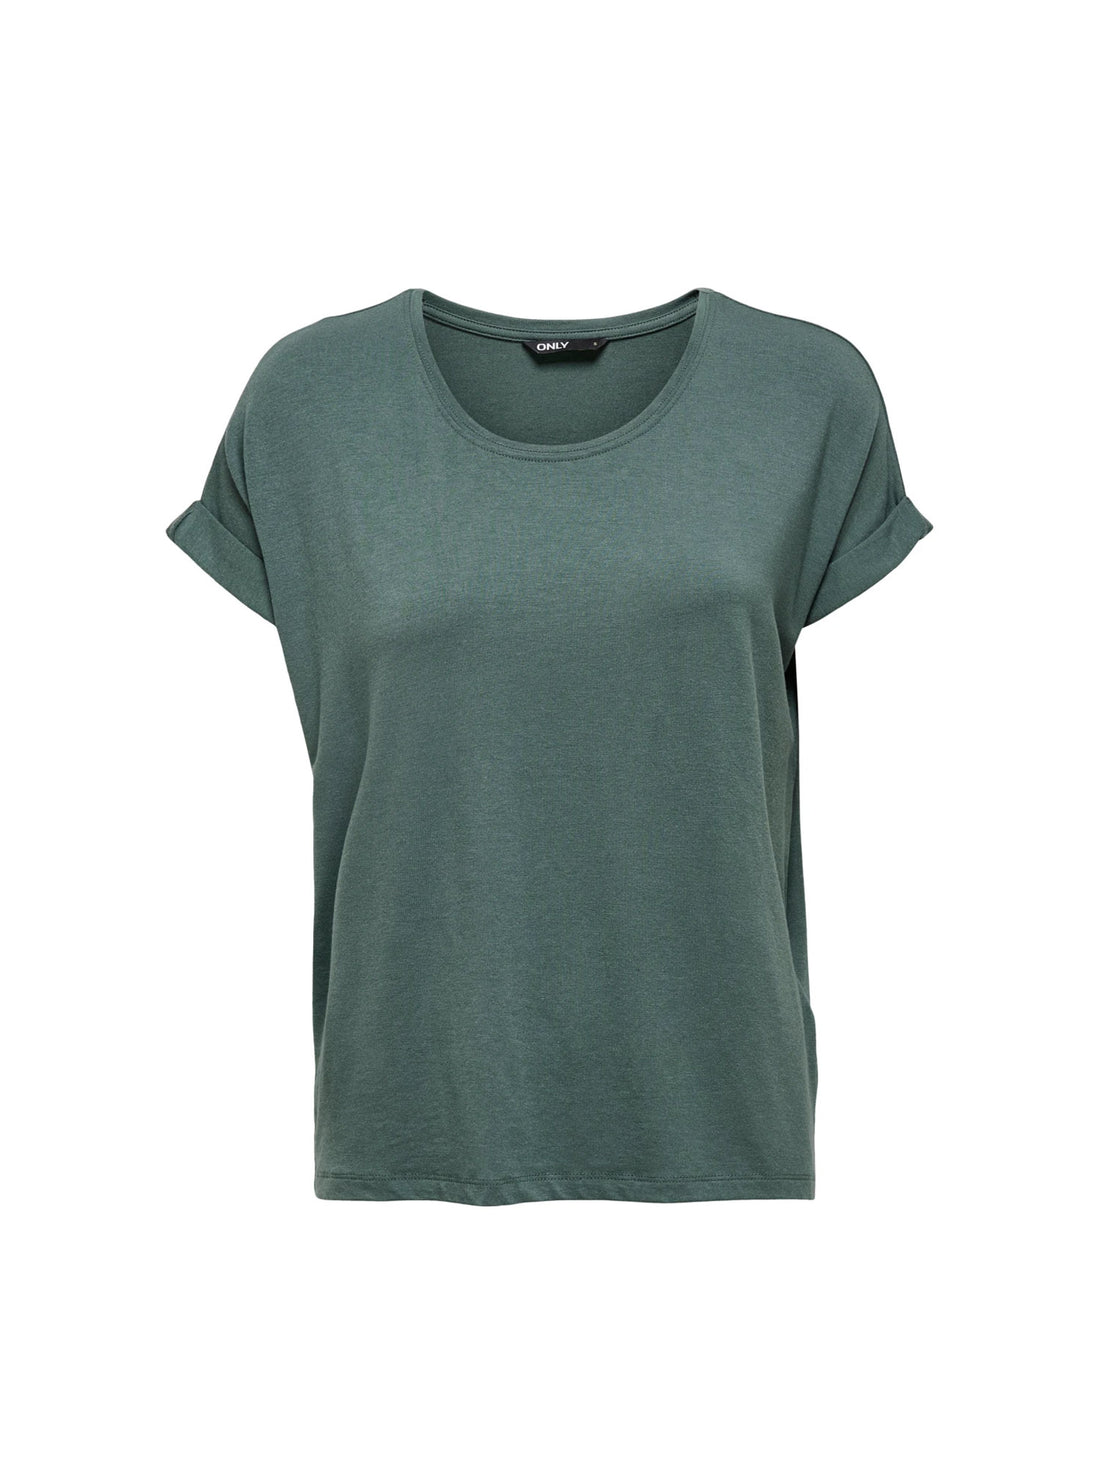 T-shirt Verde Scuro Only